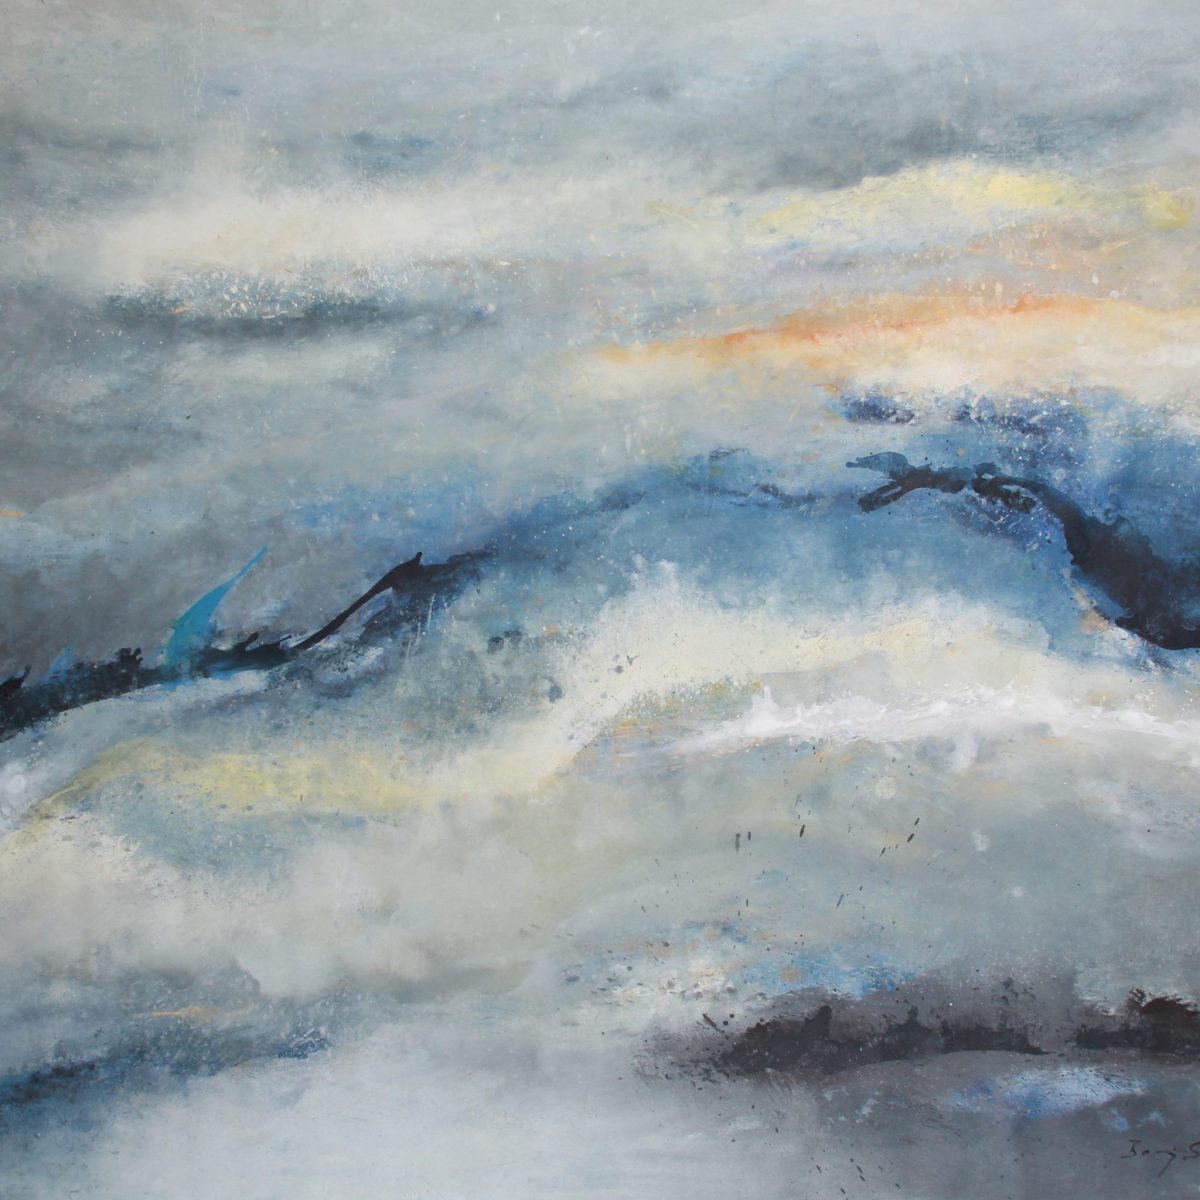 LANGUAGE OF THE CLOUDS, acrylic on canvas, 72"x86", 2014